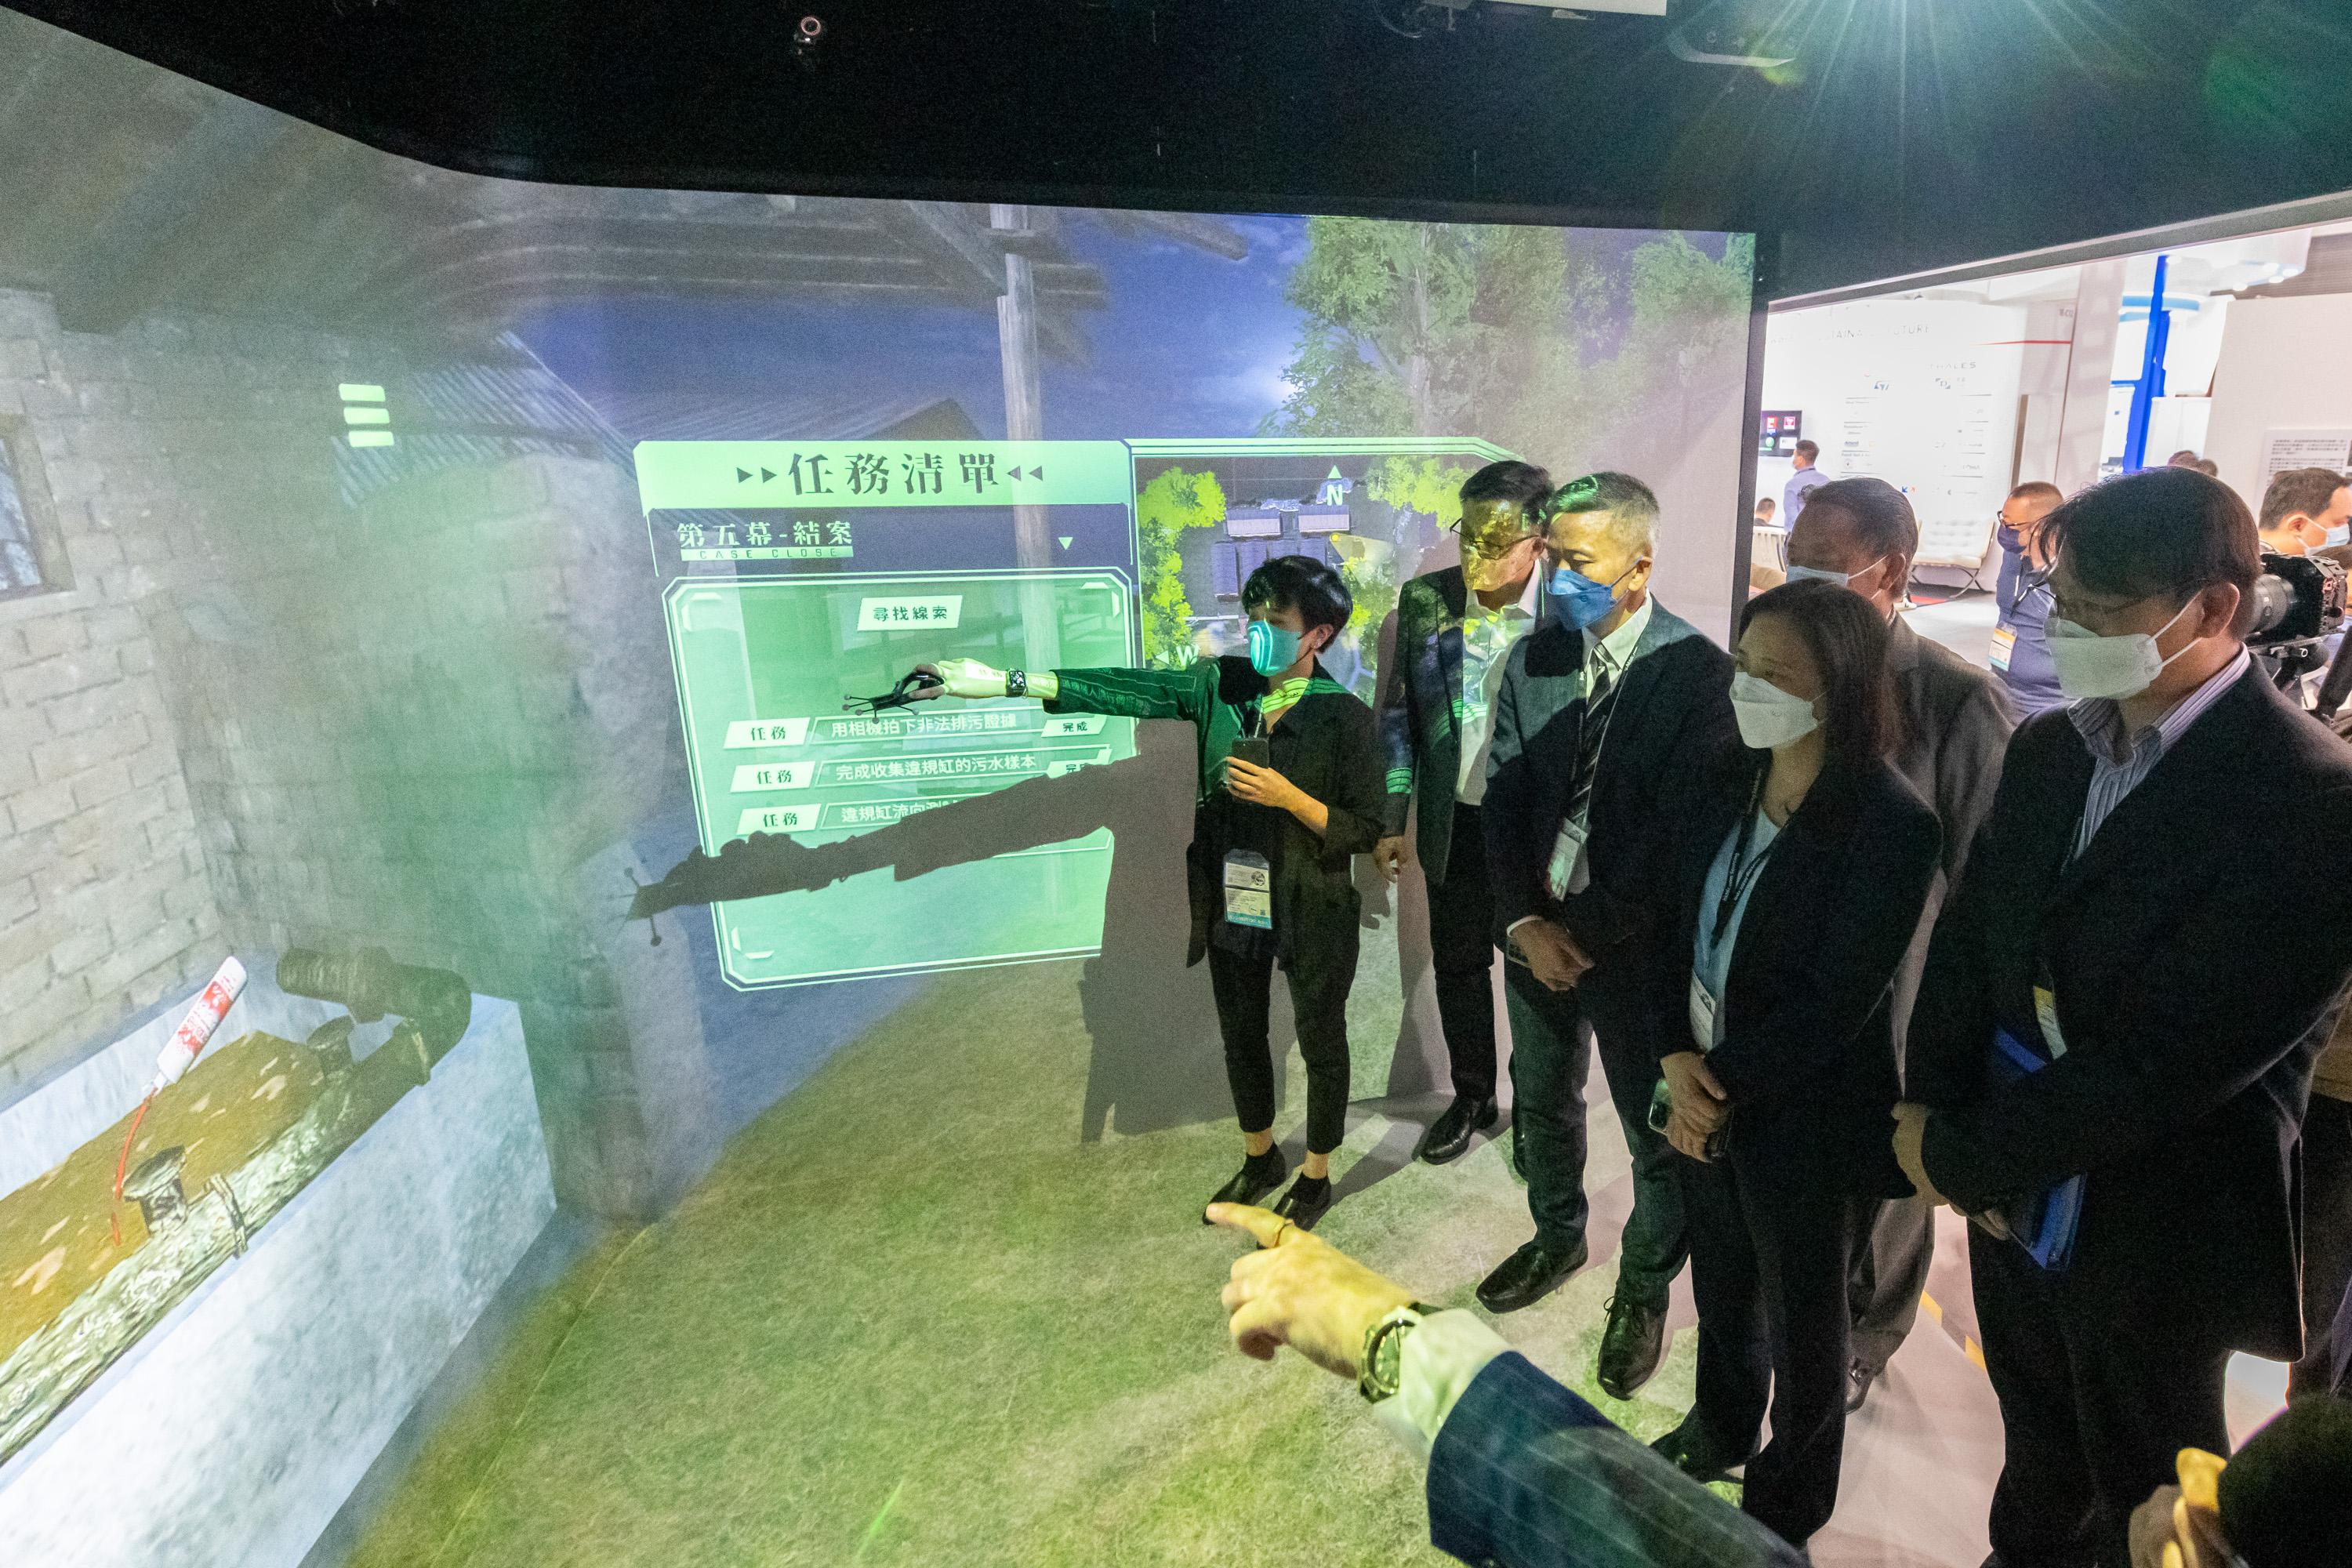 The Legislative Council (LegCo) Subcommittee on Matters Relating to the Development of Smart City visits the Smart Government Pavilion at the International ICT Expo 2022 today (October 13). Photo shows LegCo Members learning about the virtual reality enforcement training on illegal discharge from livestock farms through the interactive device at the Smart Government Pavilion.